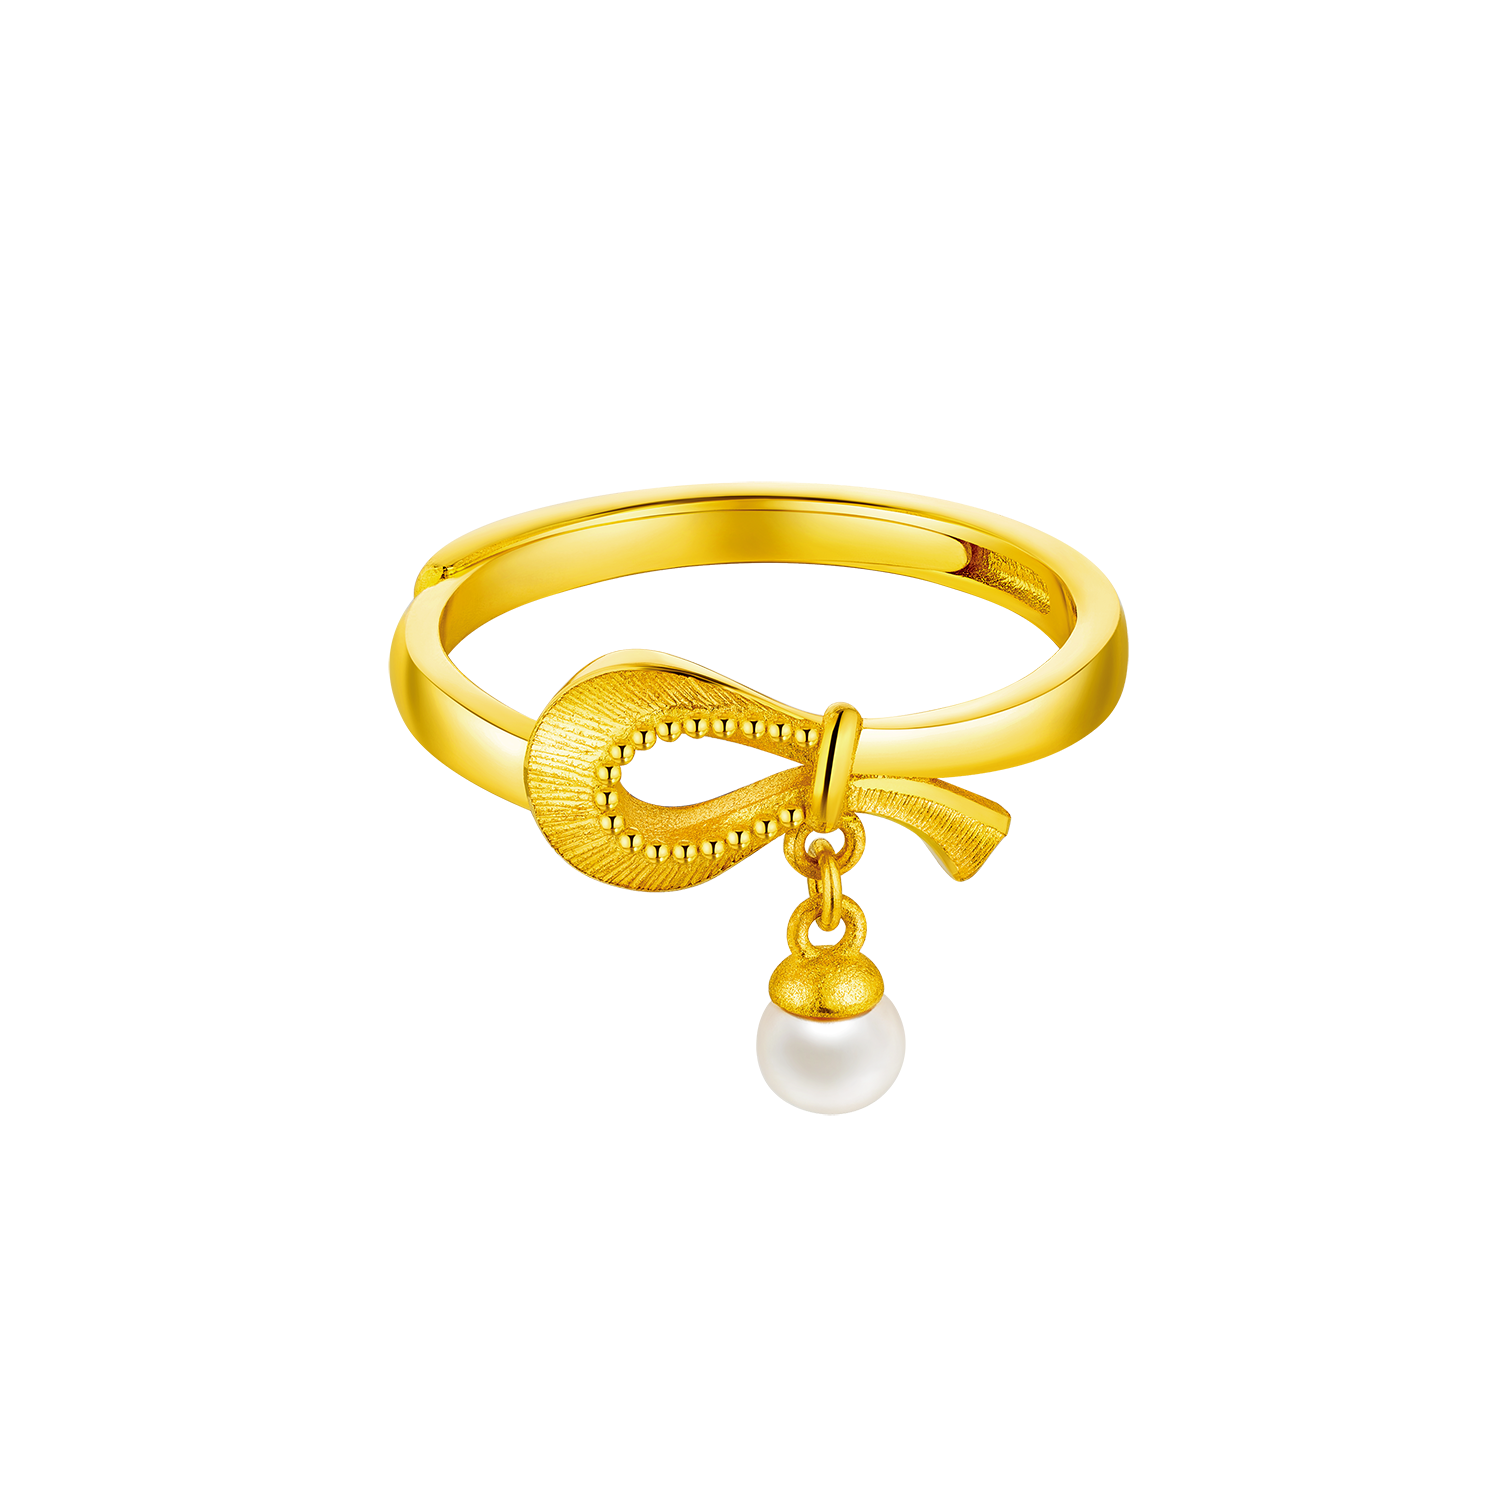 Beloved Collection "Romantic Promise" Gold Pearl Ring